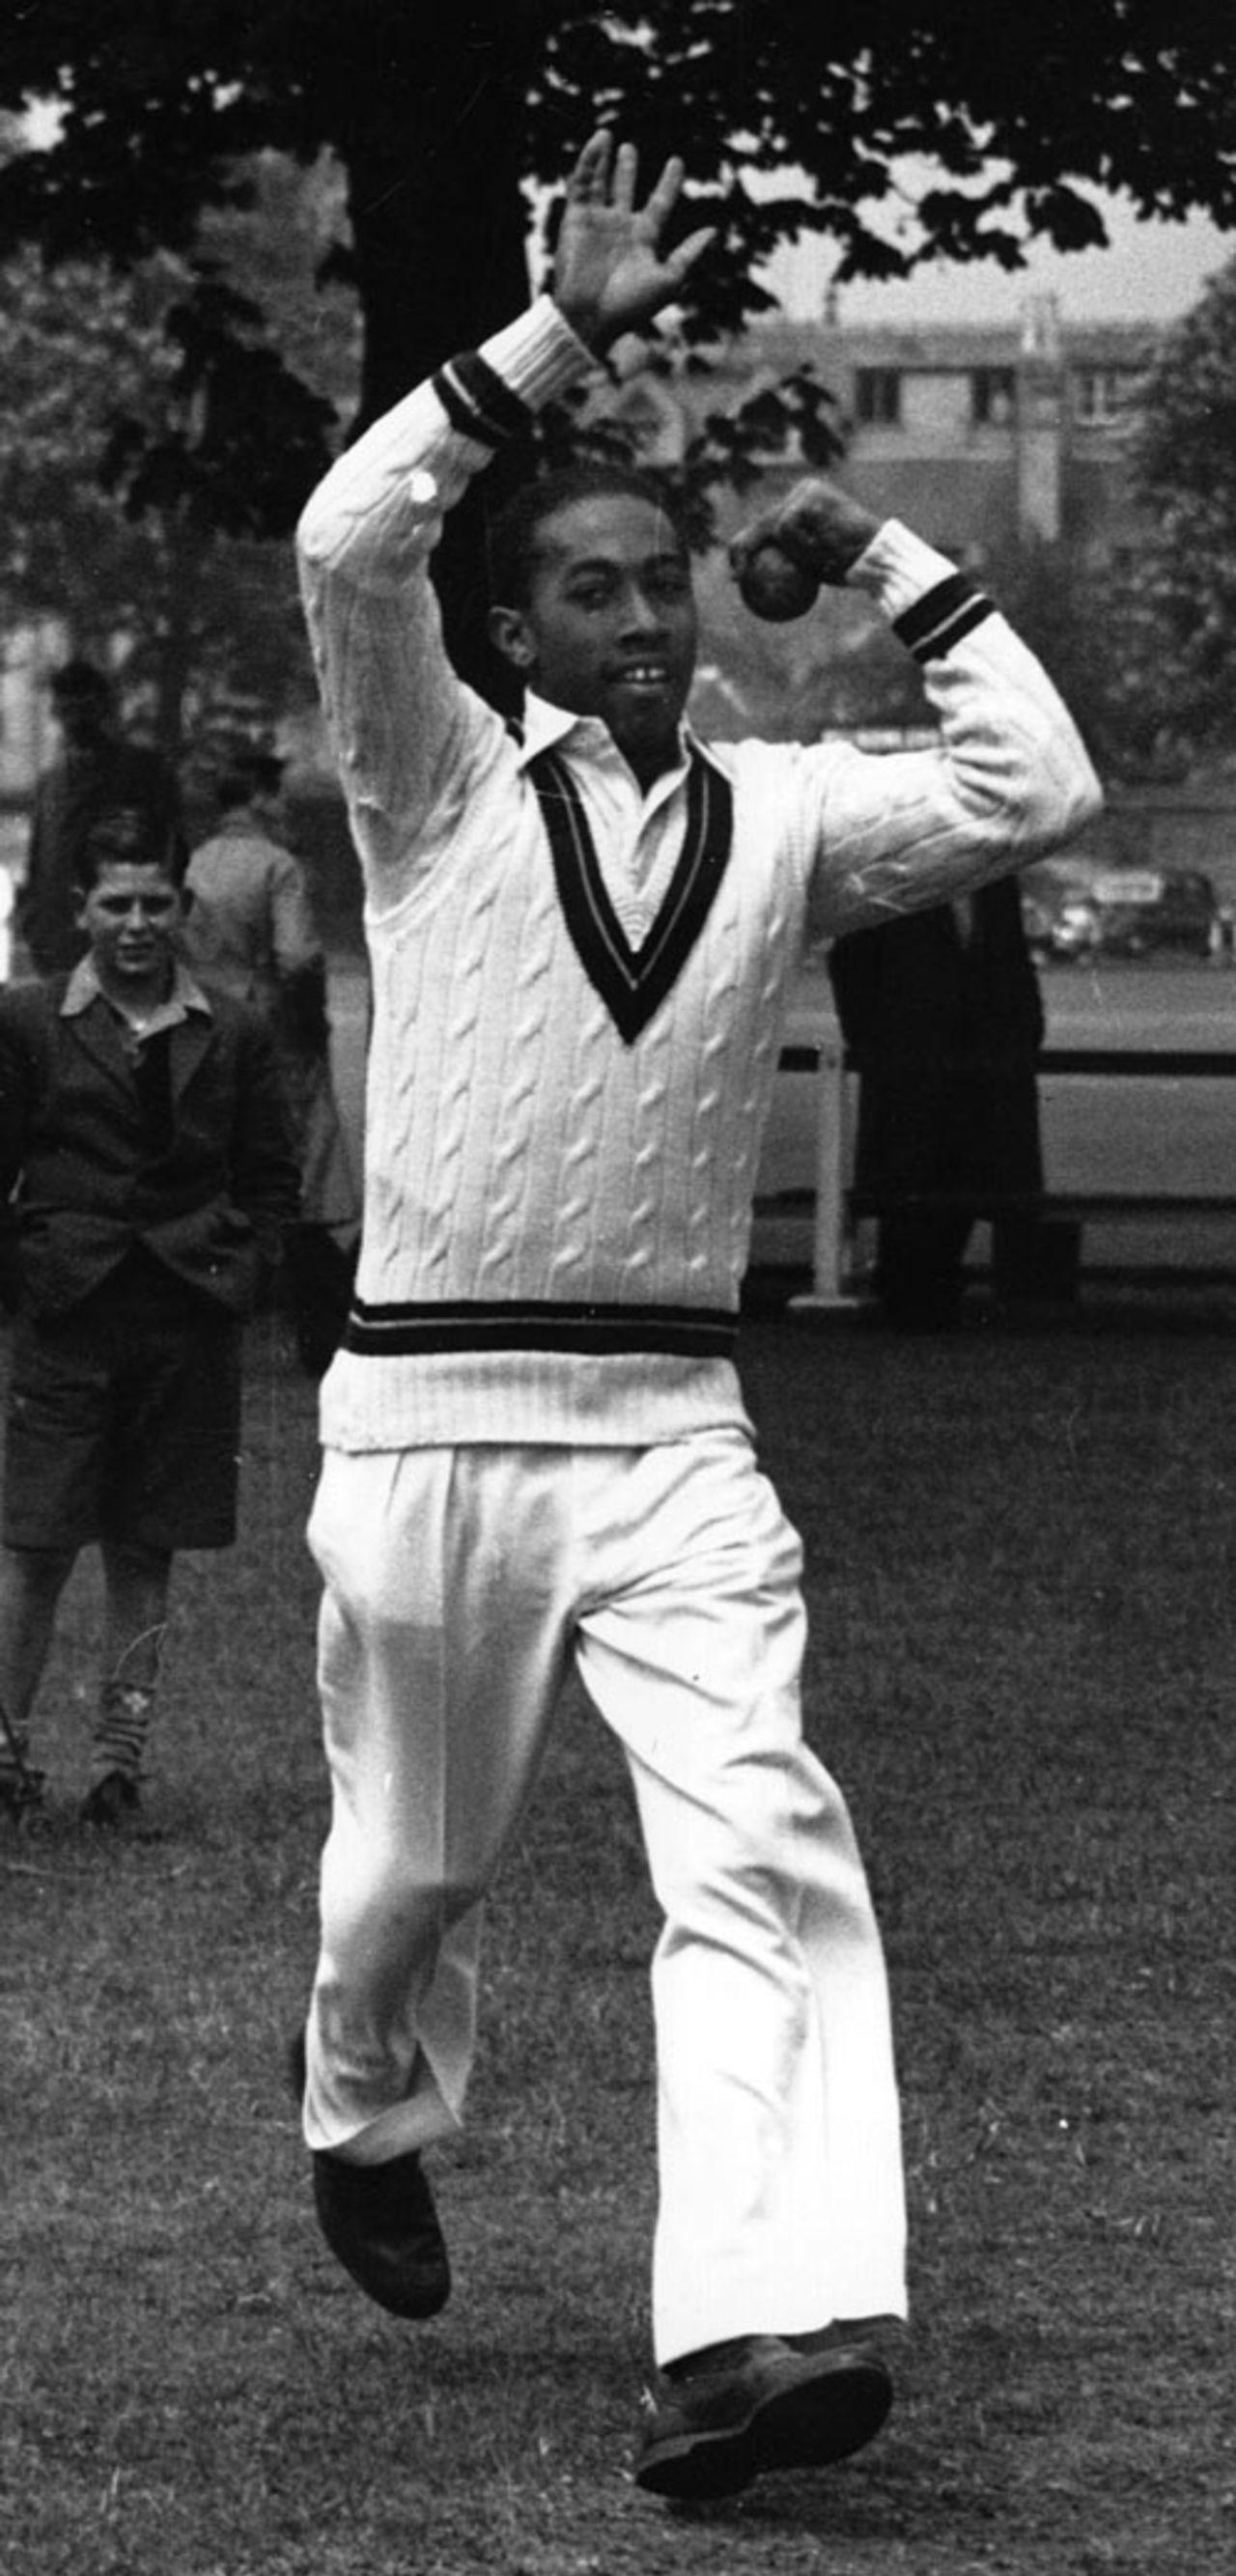 Alf Valentine bowling in the nets, June 24, 1950